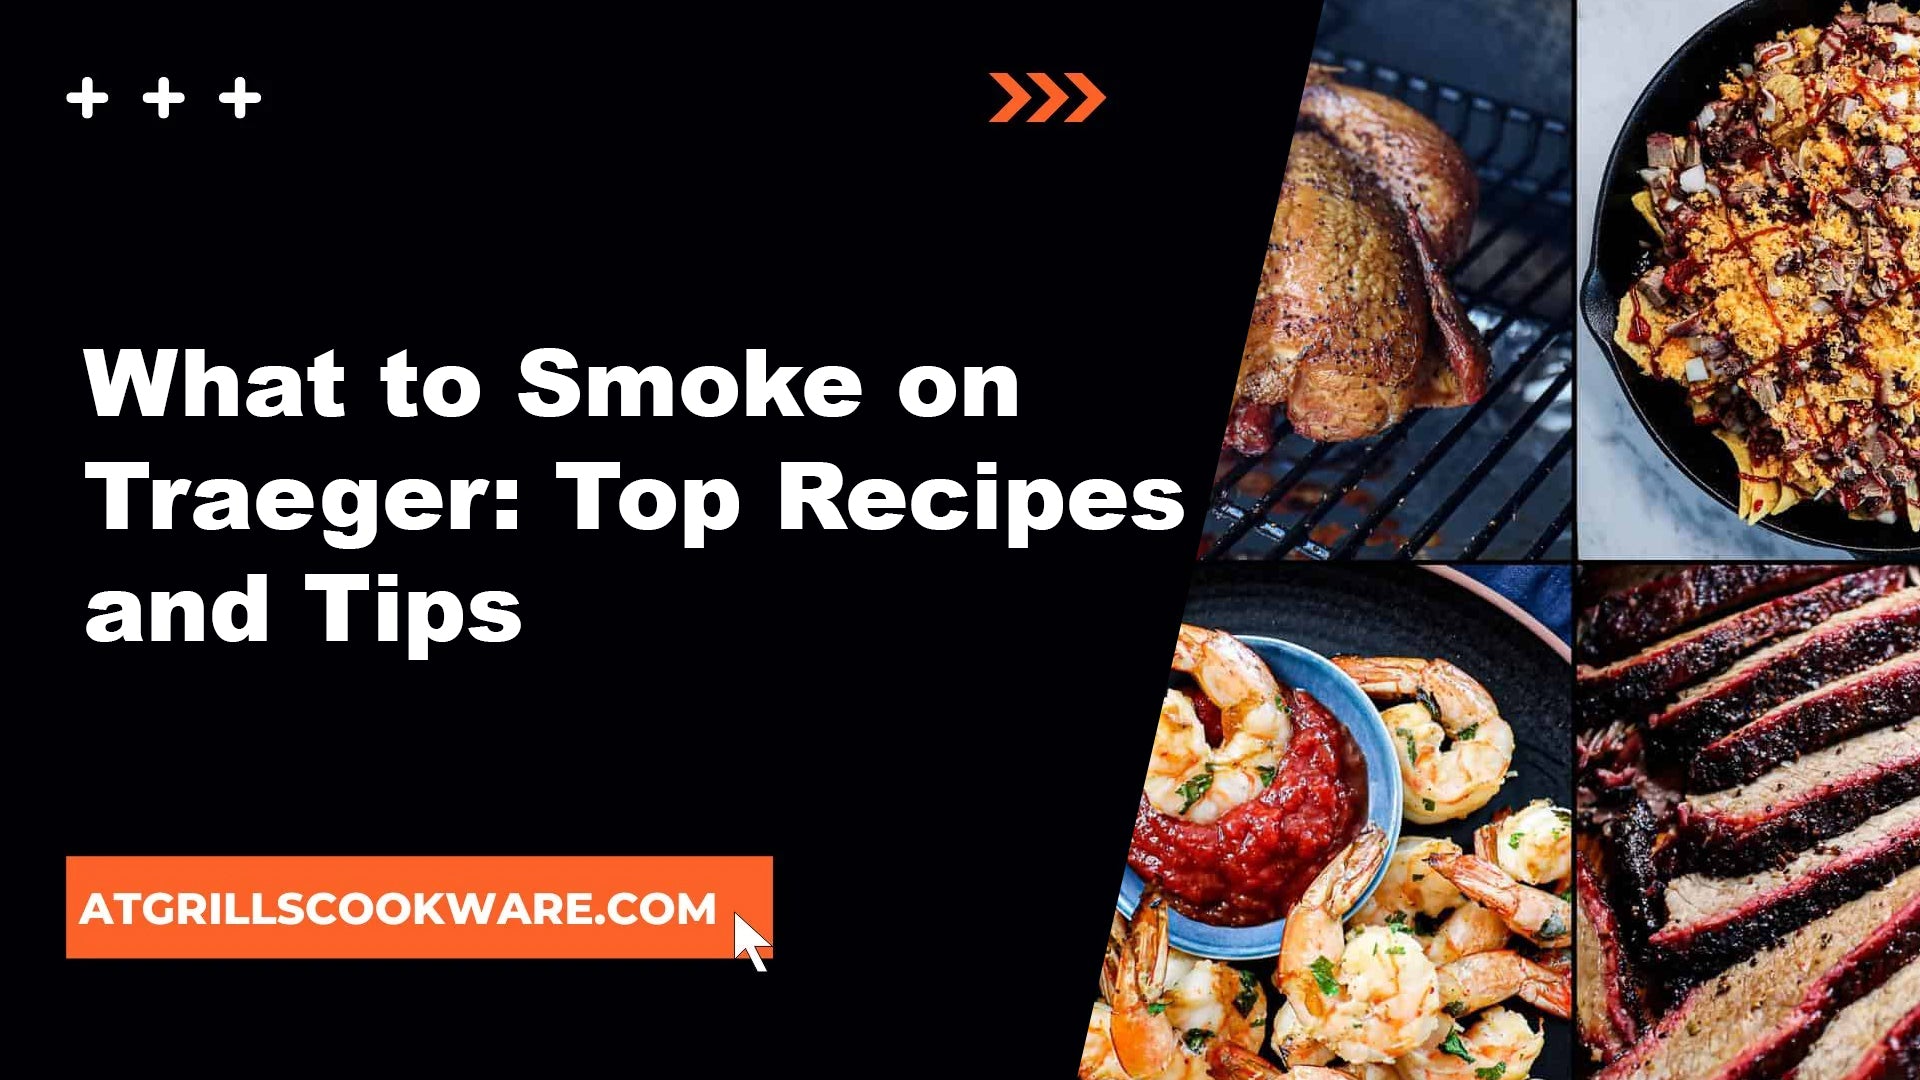 What to Smoke on Traeger: Top Recipes and Tips